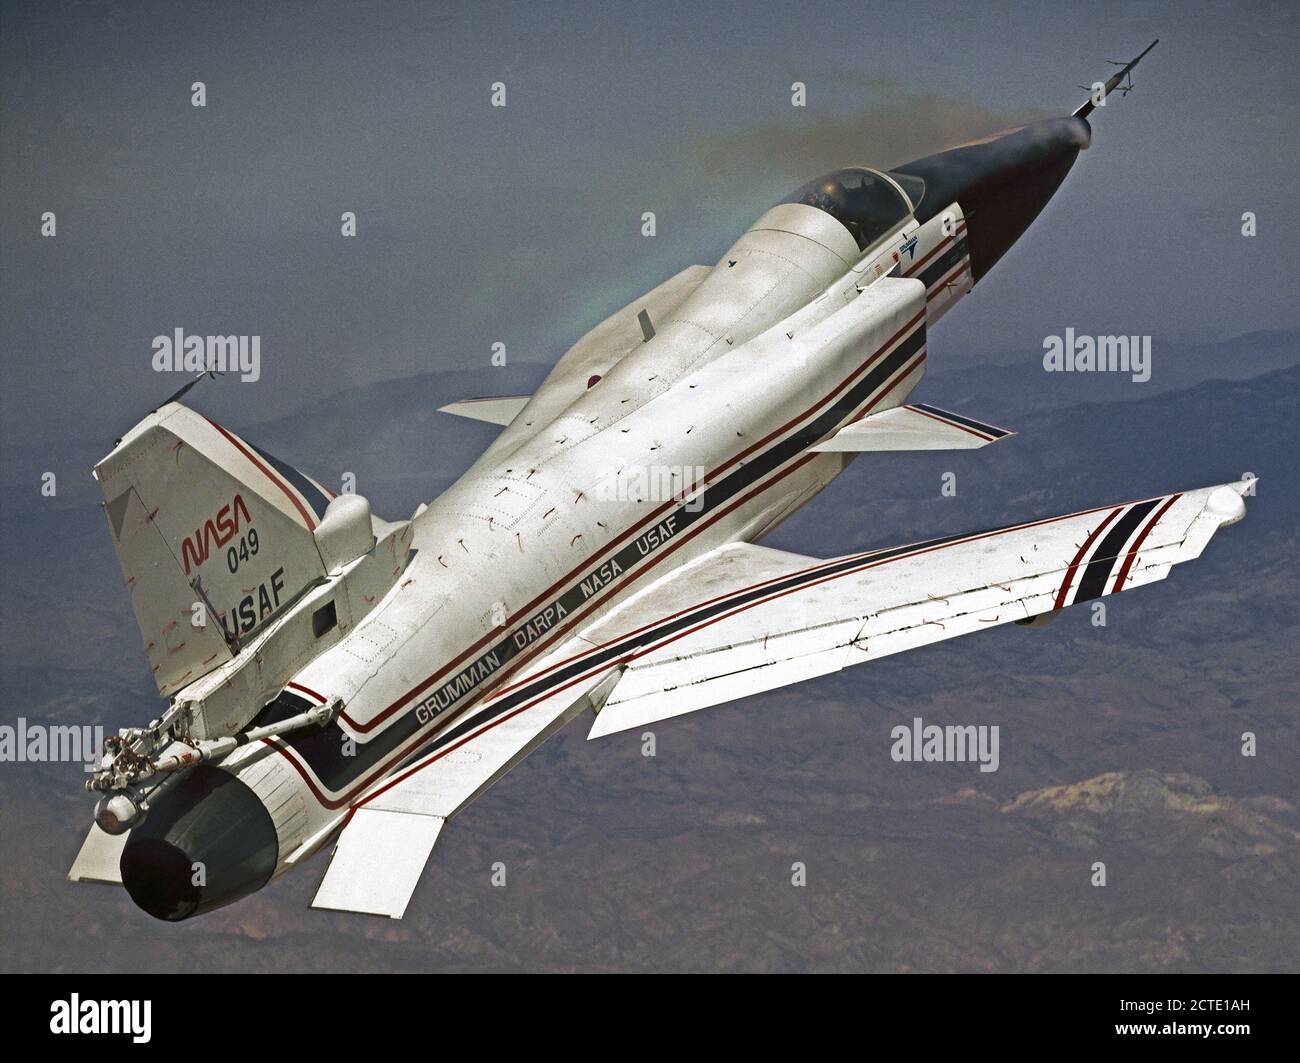 This photo shows the X-29 during a 1991 research flight. Smoke generators in the nose of the aircraft were used to help researchers see the behavior of the air flowing over the aircraft. The smoke here is demonstrating forebody vortex flow. This mission was flown September 10, 1991, by NASA research pilot Rogers Smith. Stock Photo